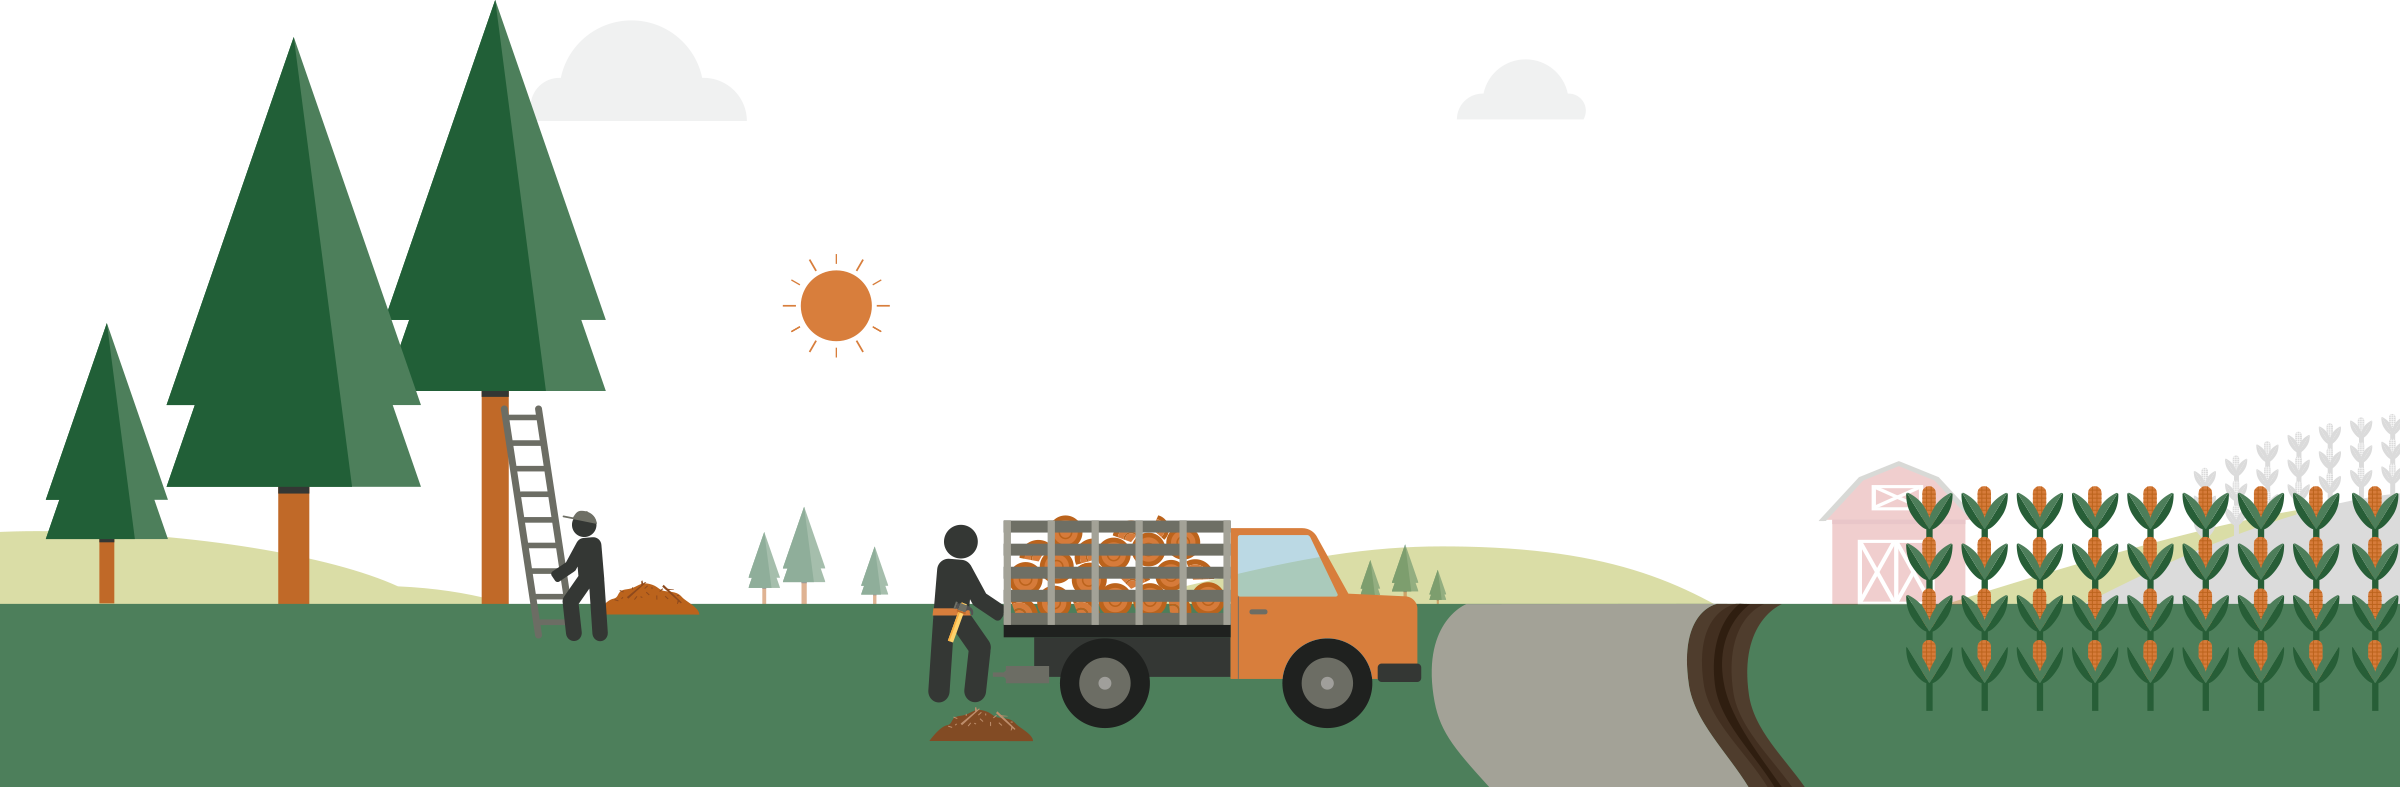 Creating Defensible Space Illustration